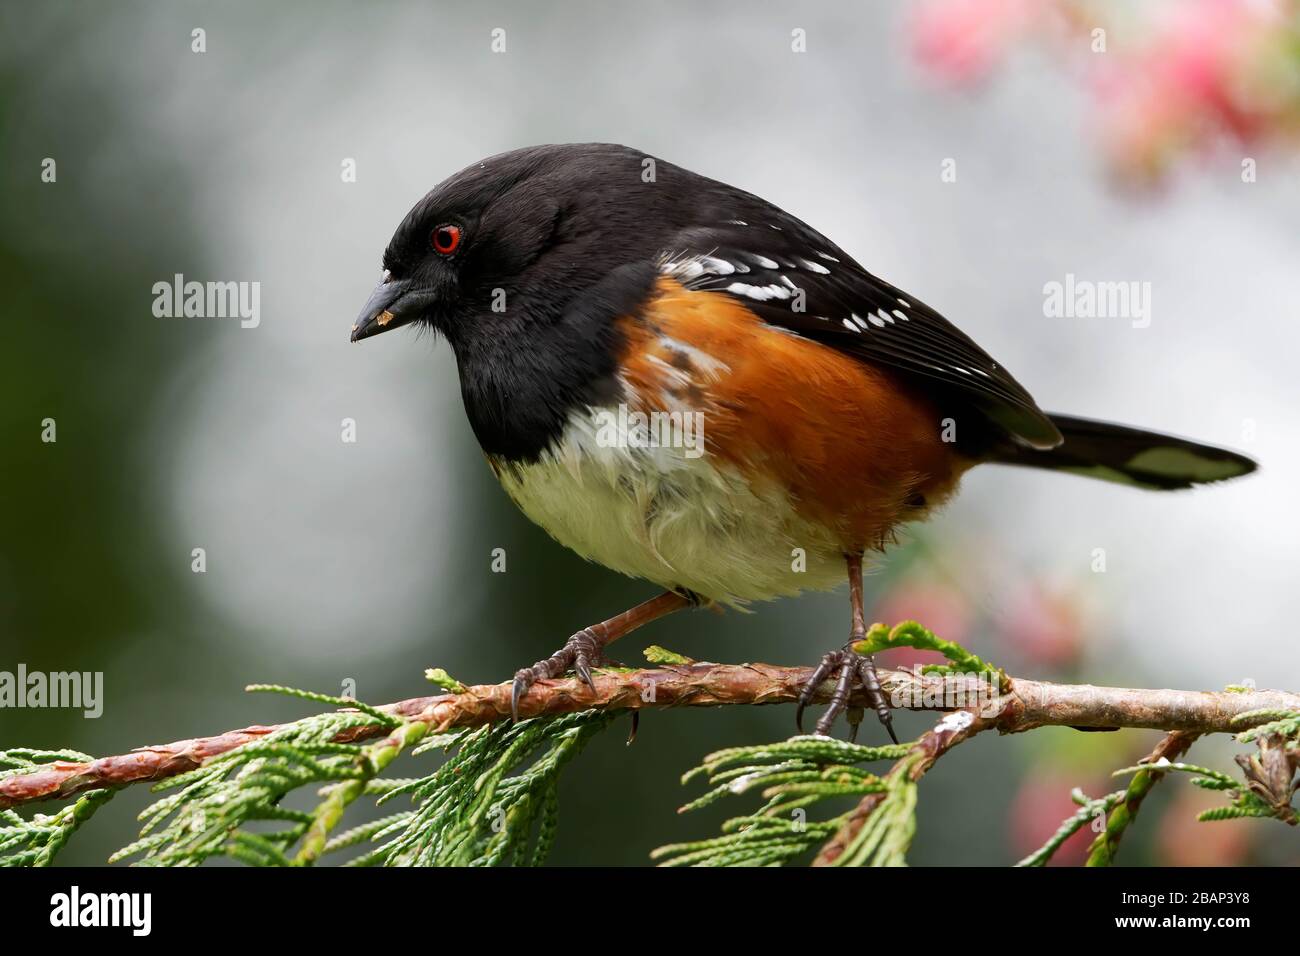 Male spotted towhee (Pipilo maculatus) perched on Western redcedar branch, Snohomish, Washington, USA Stock Photo